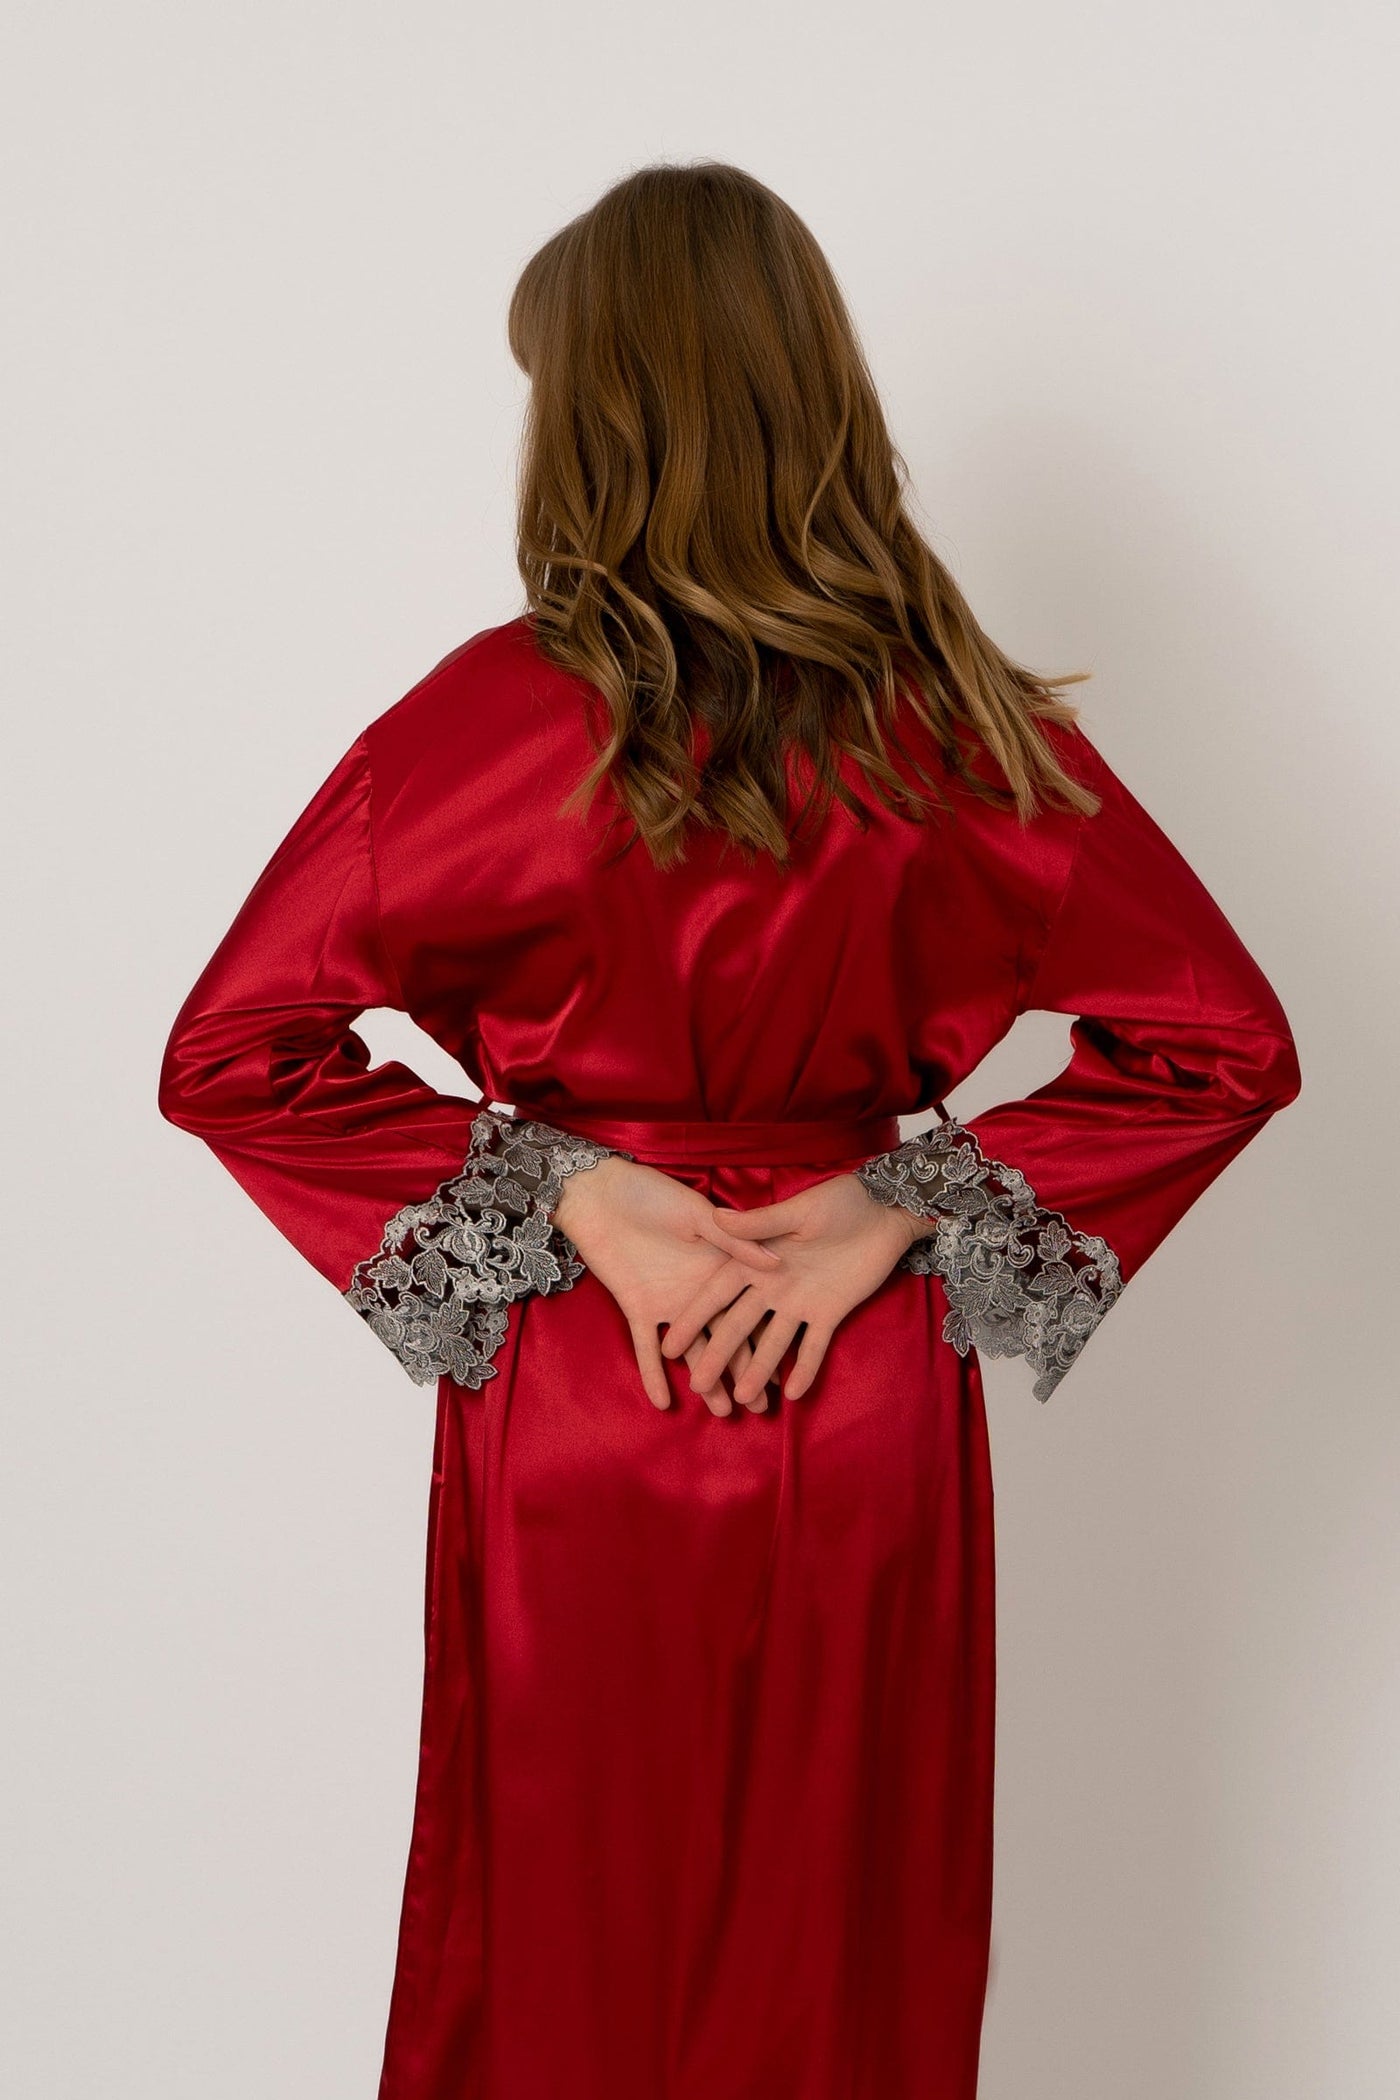 Velouette Robe-Red